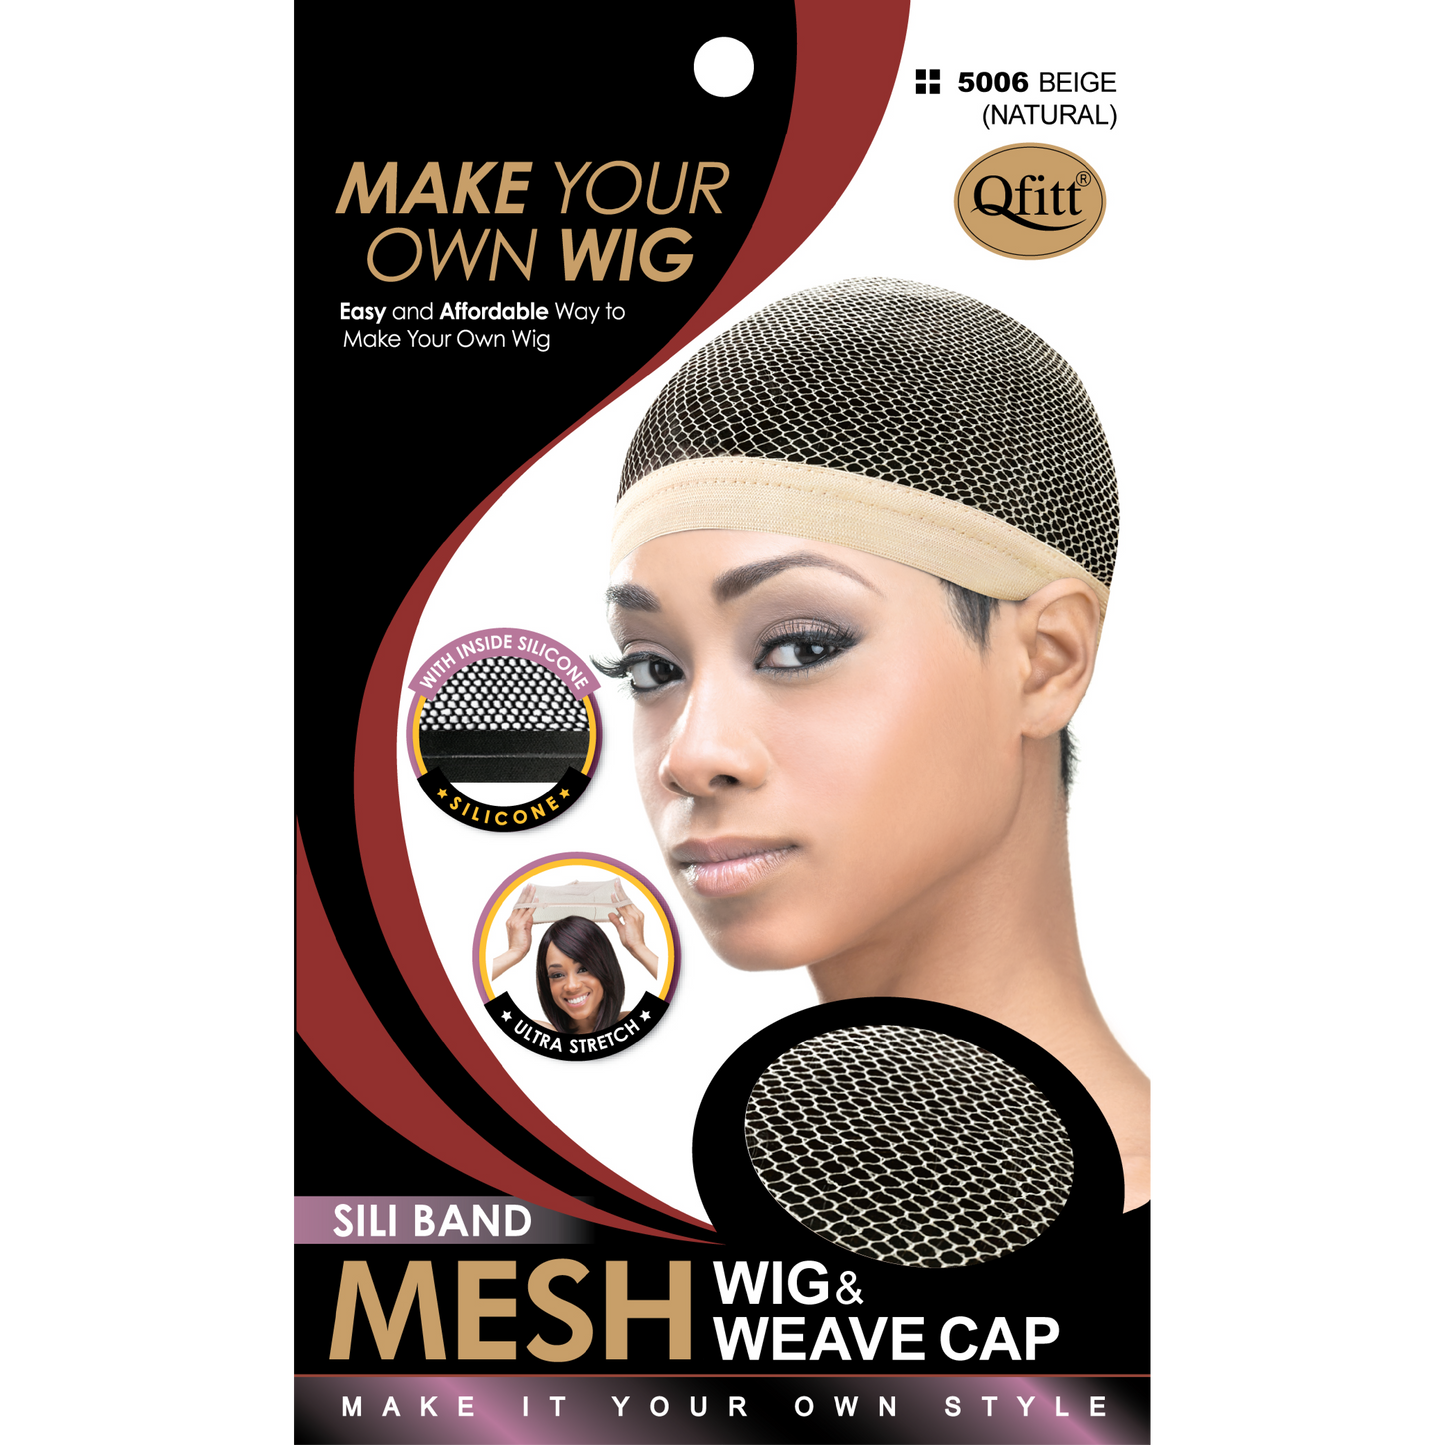 SILICONE BAND MESH WIG & WAVE CAP